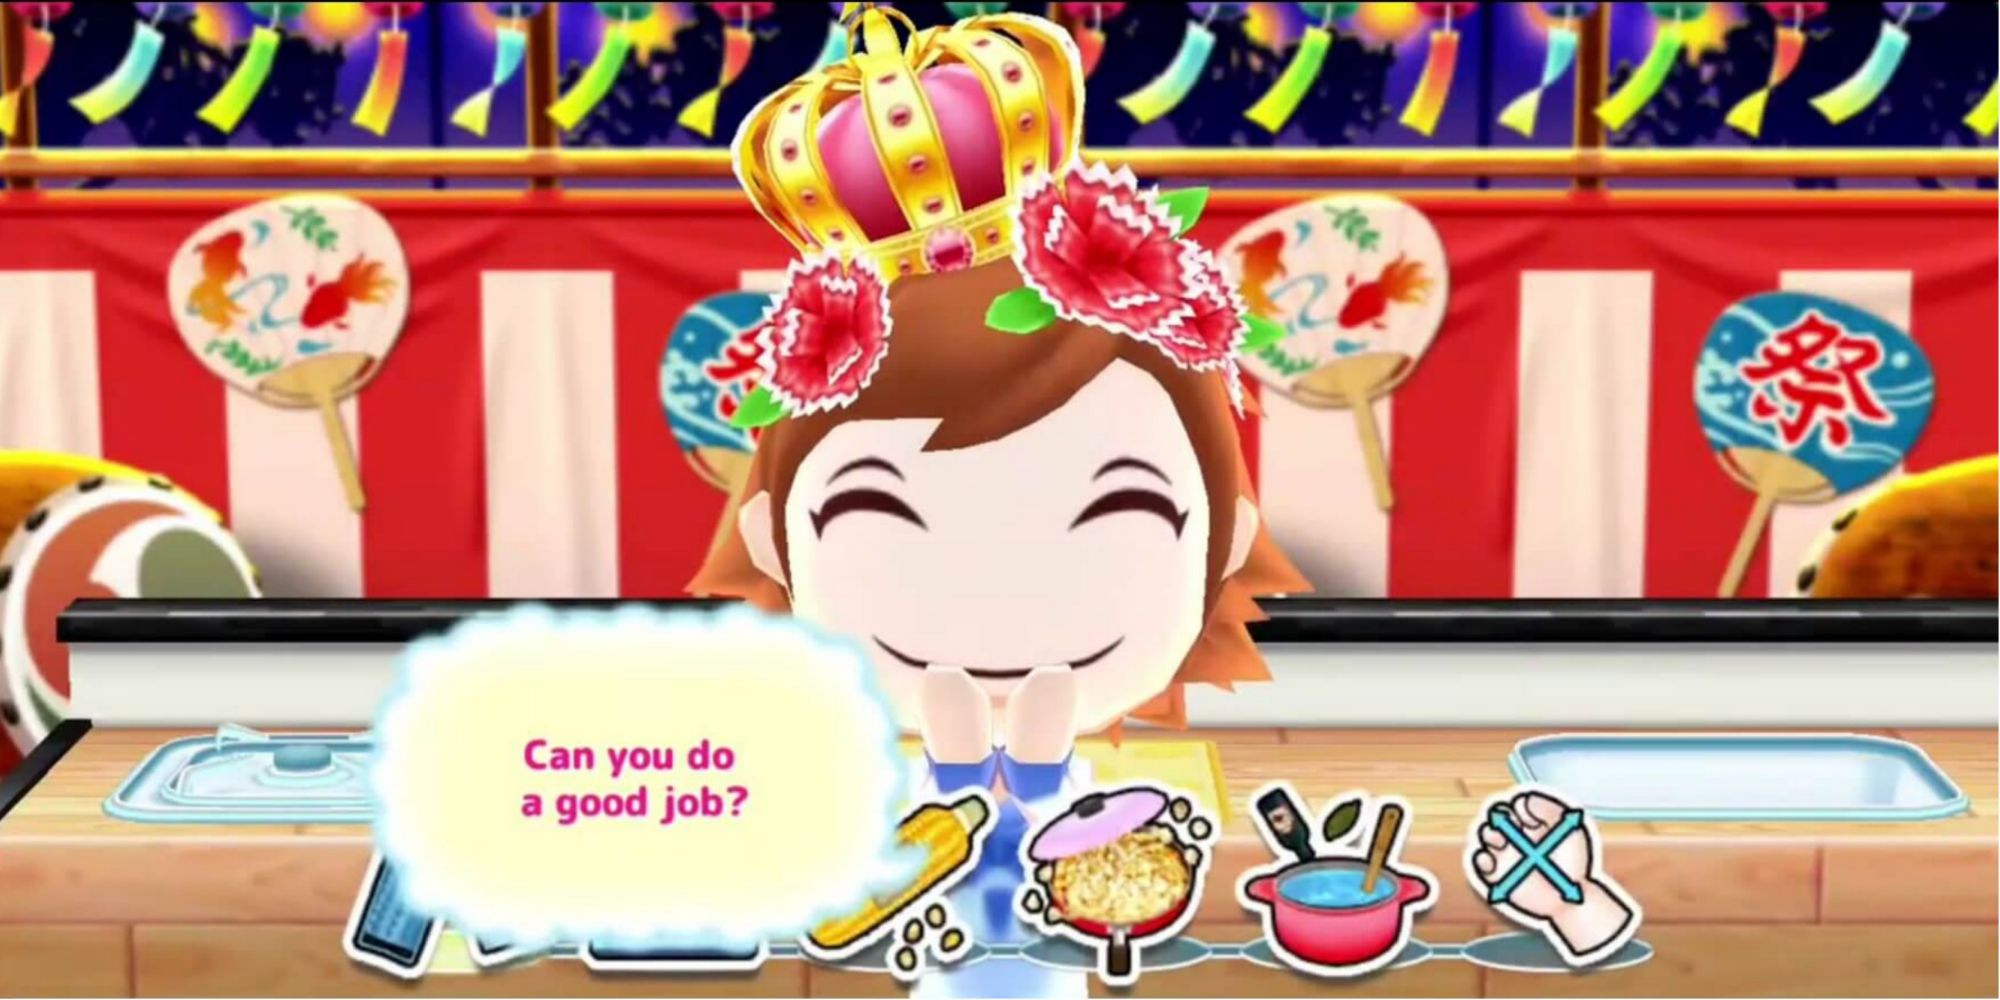 Cooking Mama stands at counter with ingredient options asking if you can do a good job